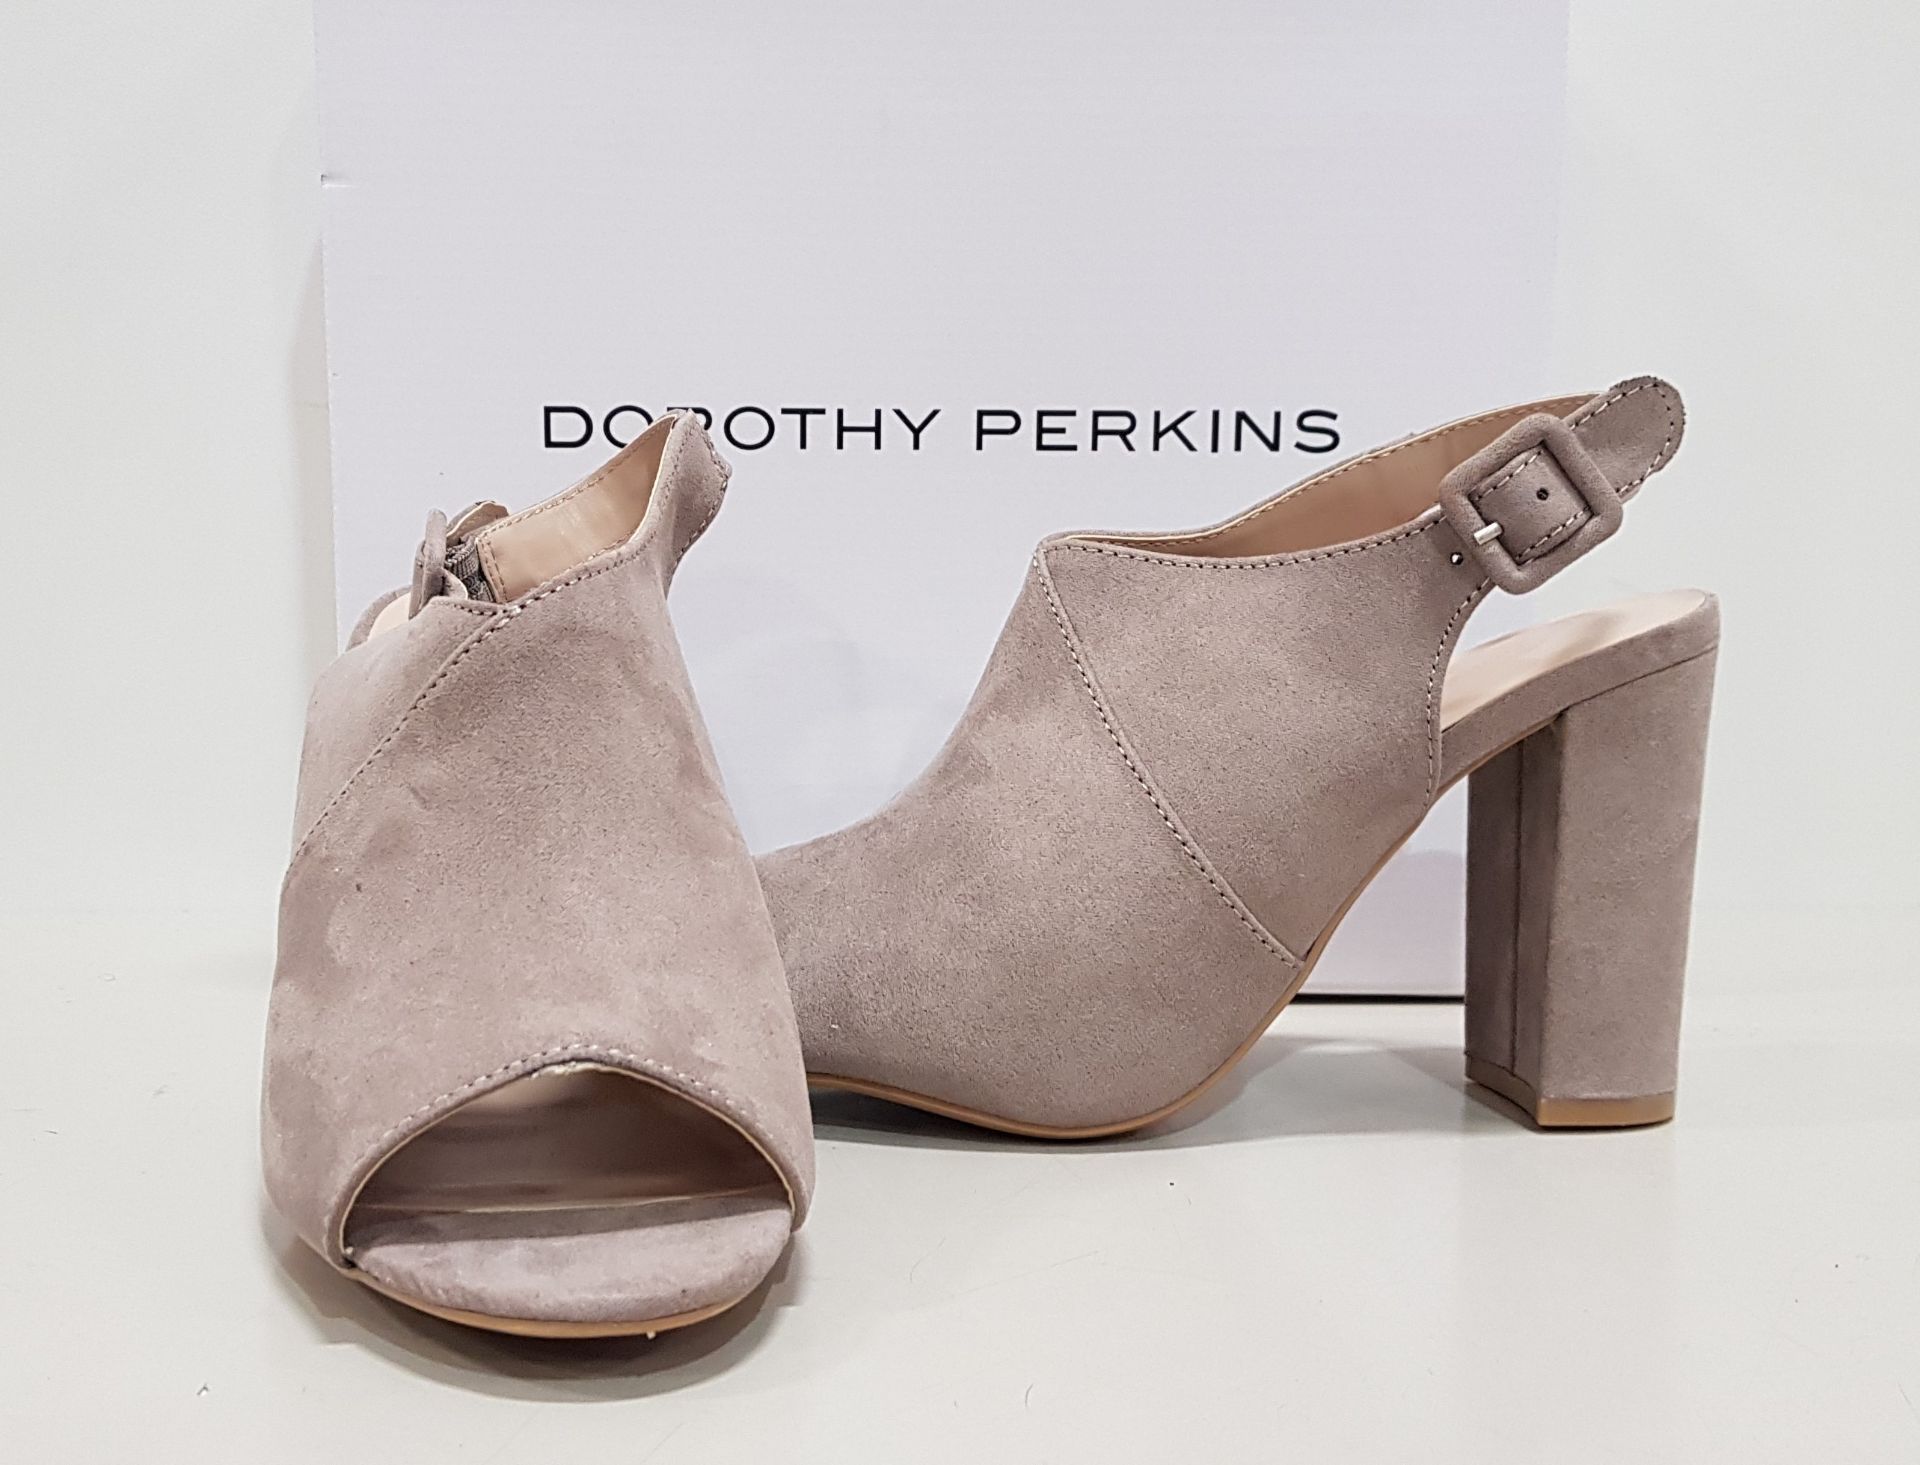 24 X BRAND NEW DOROTHY PERKINS SAVO TAUPE HEELED SANDALS - SIZE UK 5 - RRP £28.00 PAIR - TOTAL £672